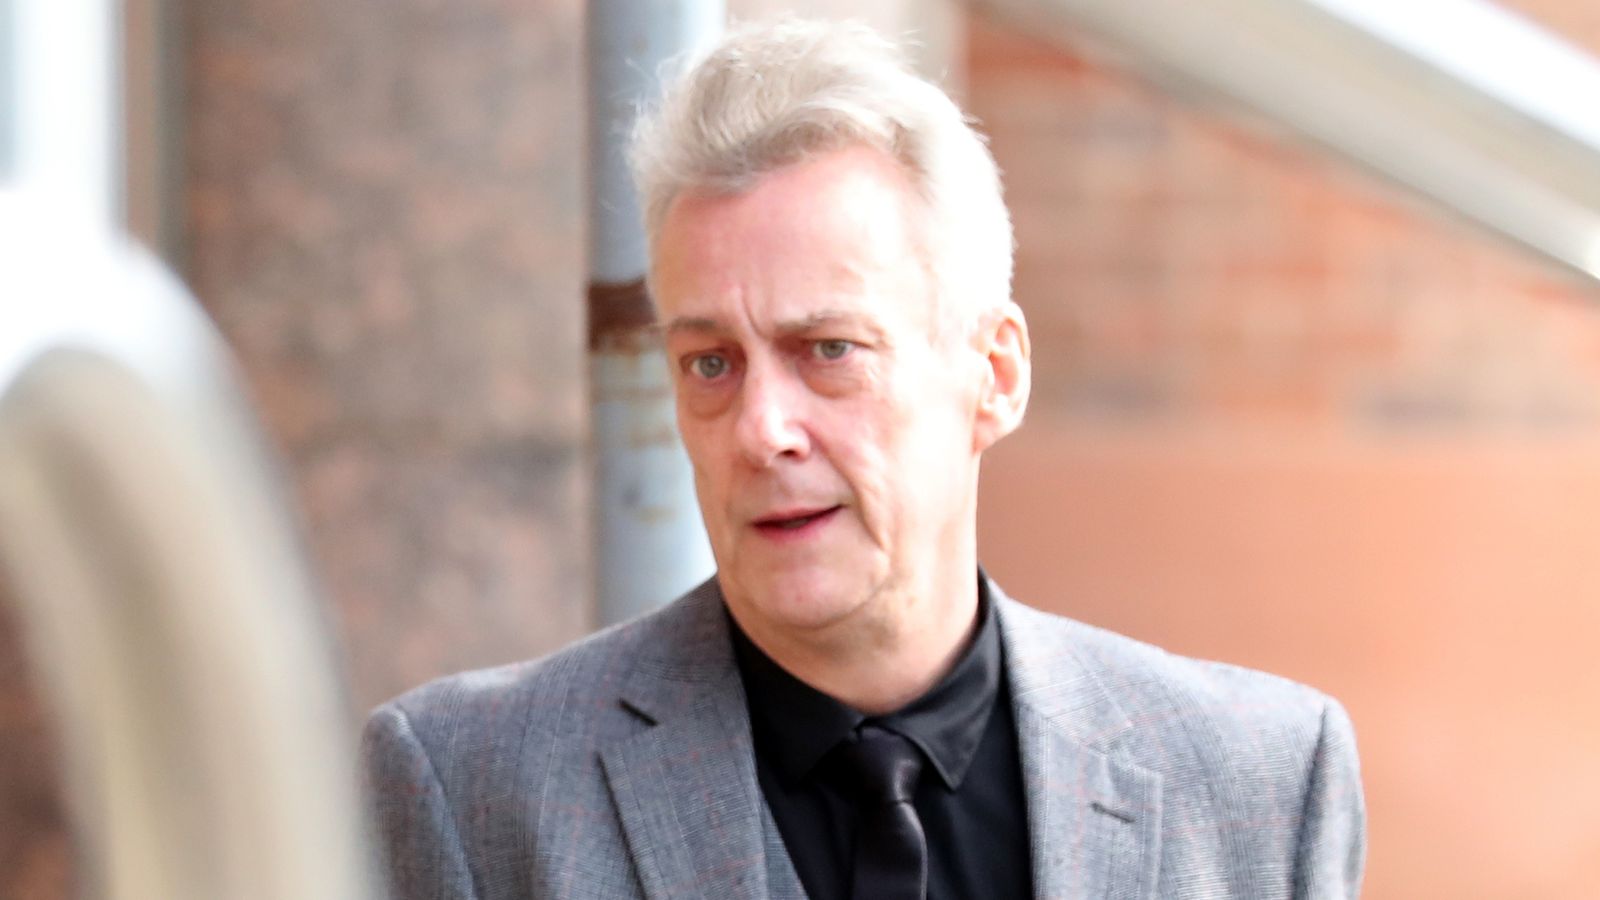 Stephen Tompkinson trial: Actor 'punched drunken man' and 'caused traumatic brain injuries', court told